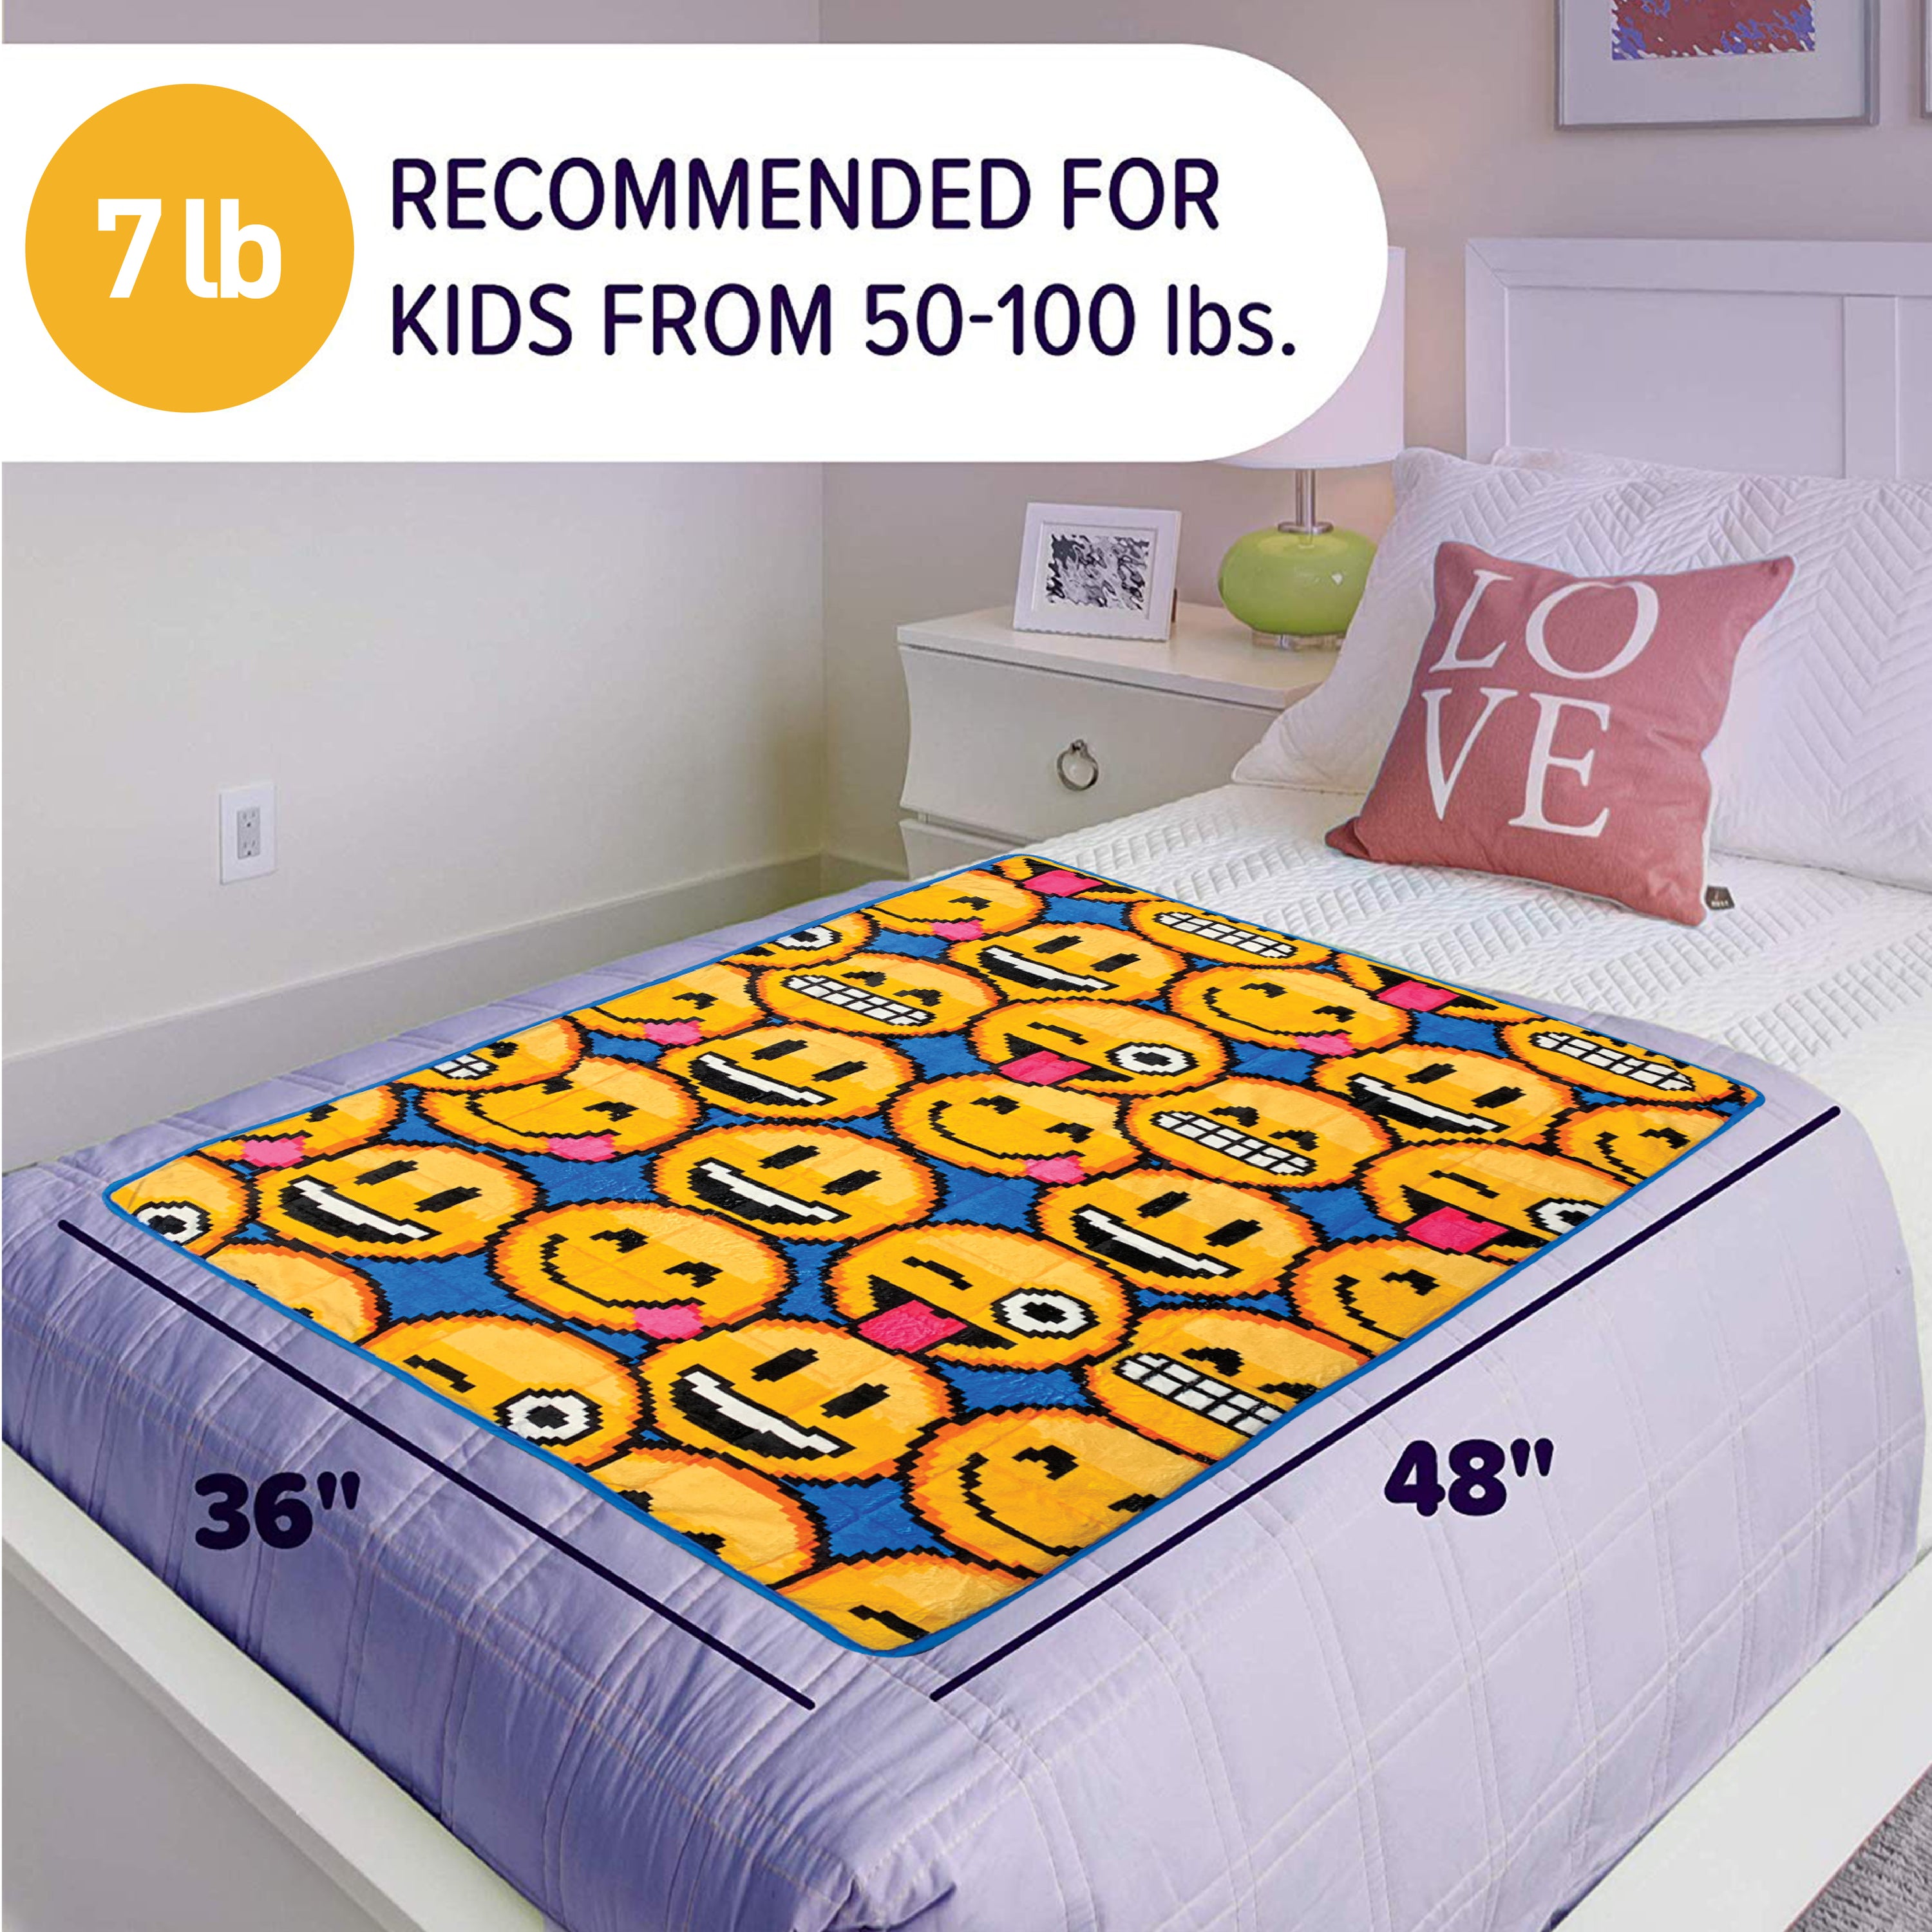 Bell + Howell Kids 7LB Weighted Blanket: A Soothing Embrace for Restful Sleep